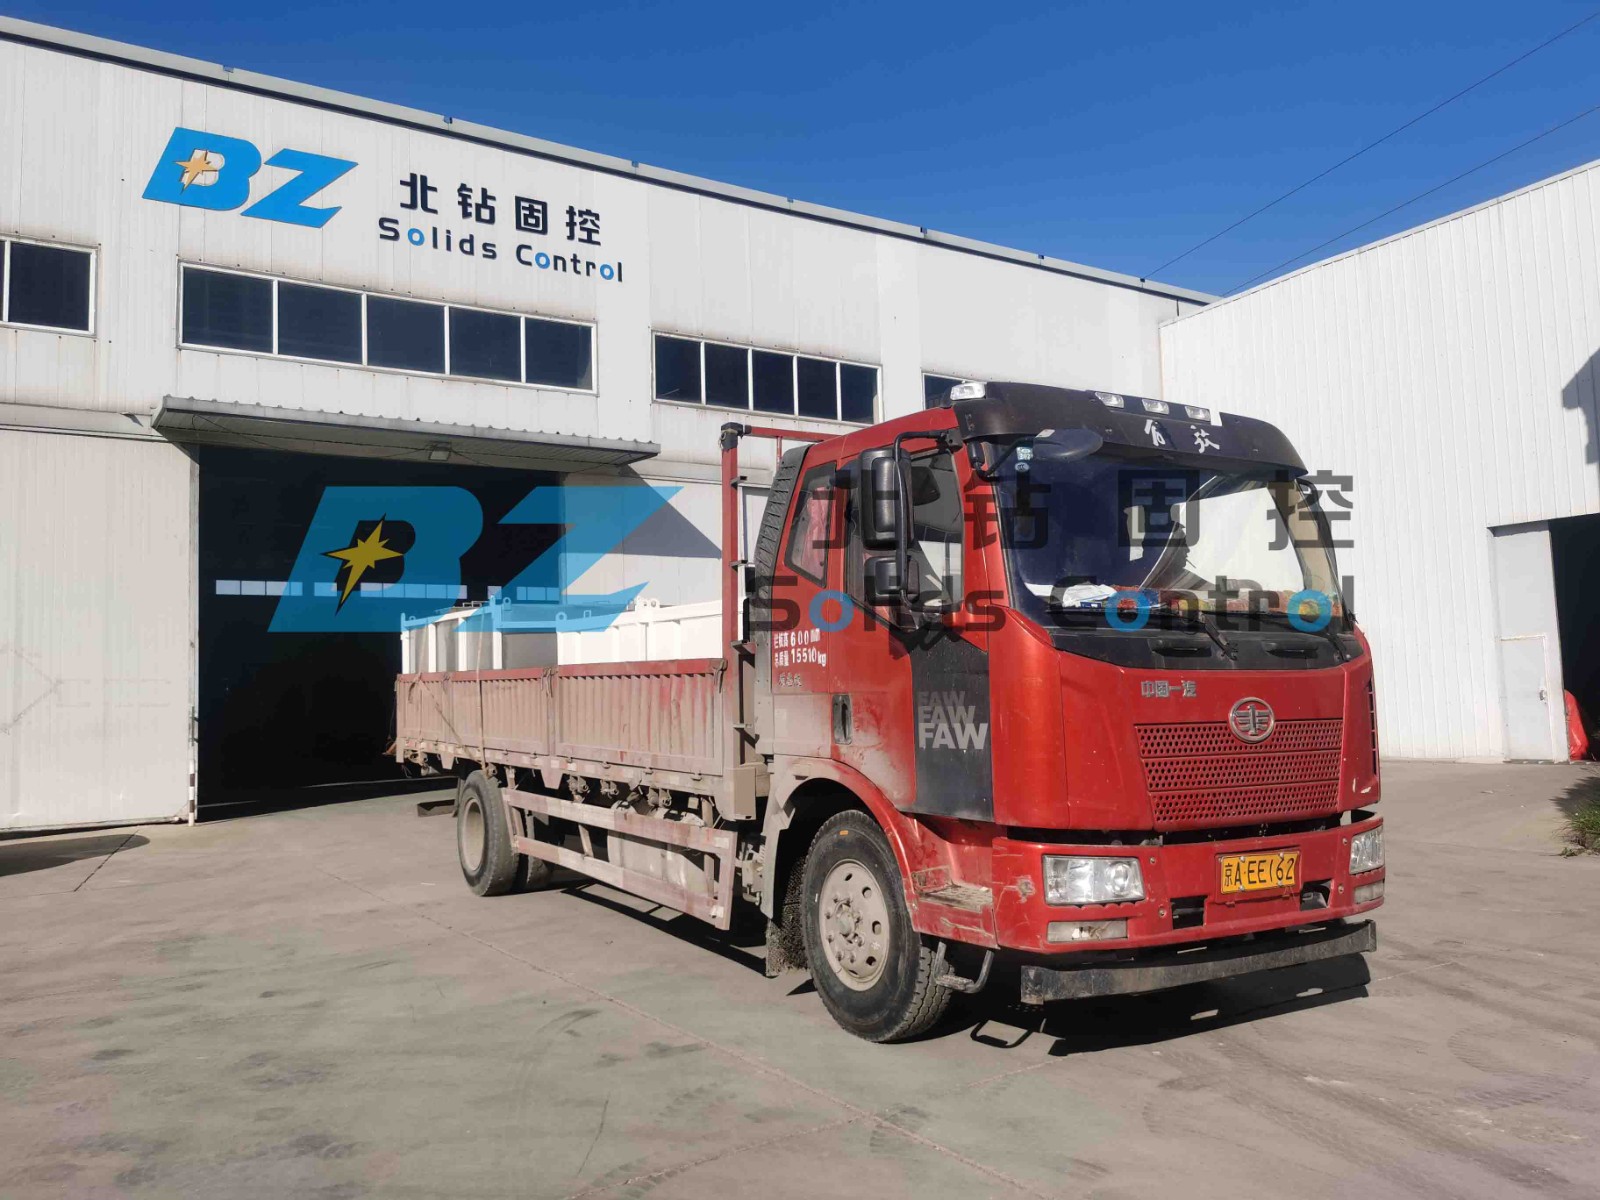 BZ vacuum solids convey pump and tank are sent to project sites